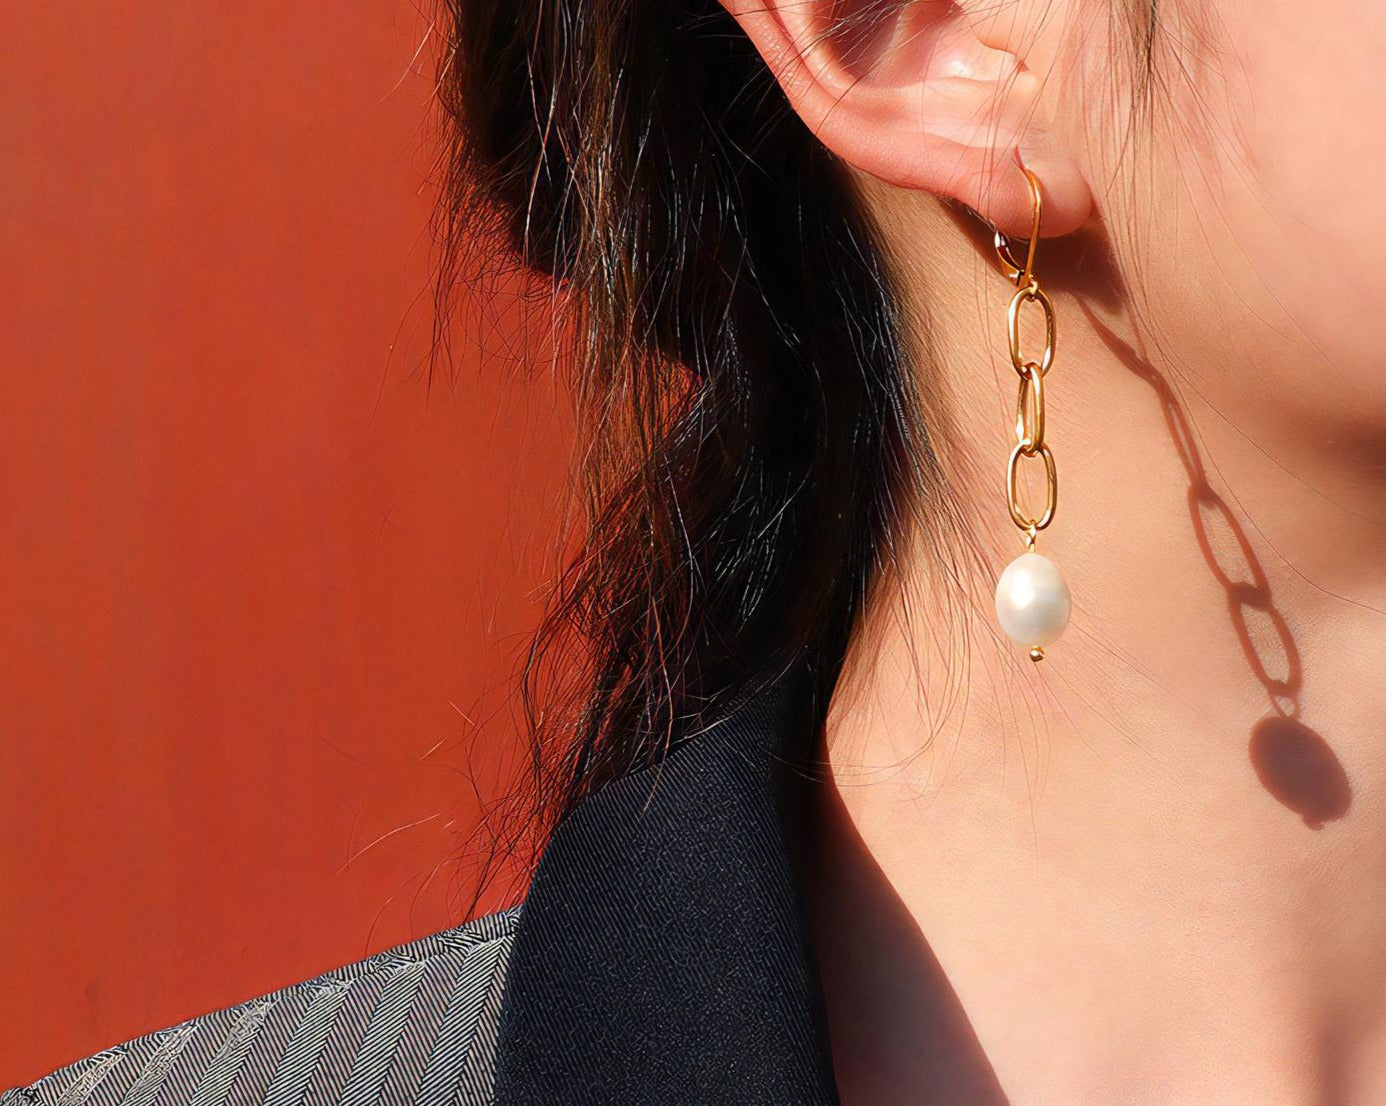 Ethereal Harmony: Chain and Baroque Pearl Earrings